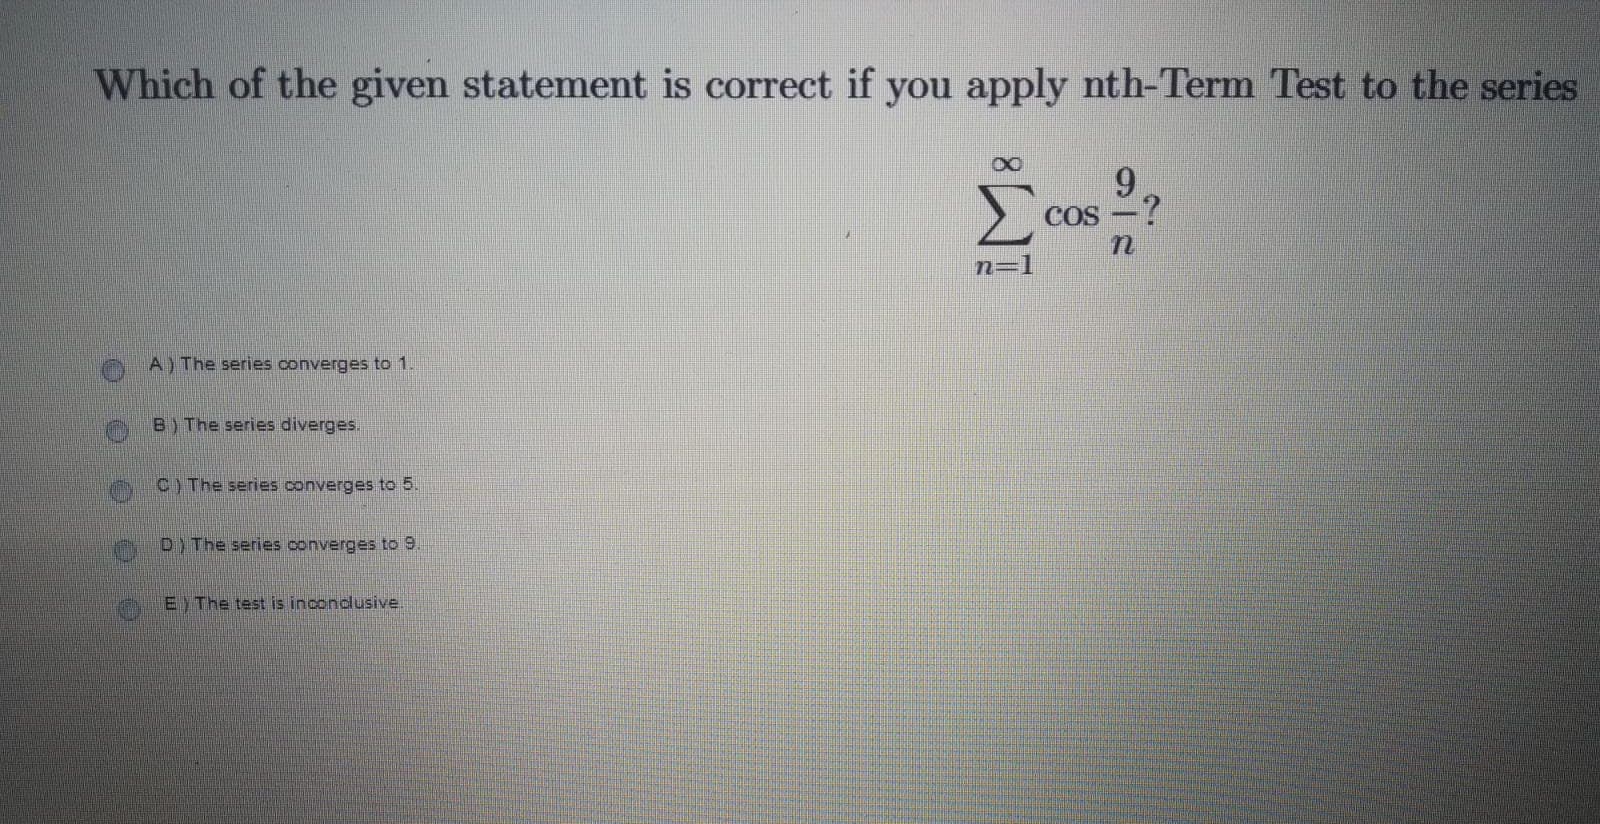 Which of the given statement is correct if you apply nth-Term Test to the series
9.
COS
n=
A) The series converges to 1
B) The series diverges.
C) The series converges to 5.
D)The series converges to9
E) The test is inconclusive.
